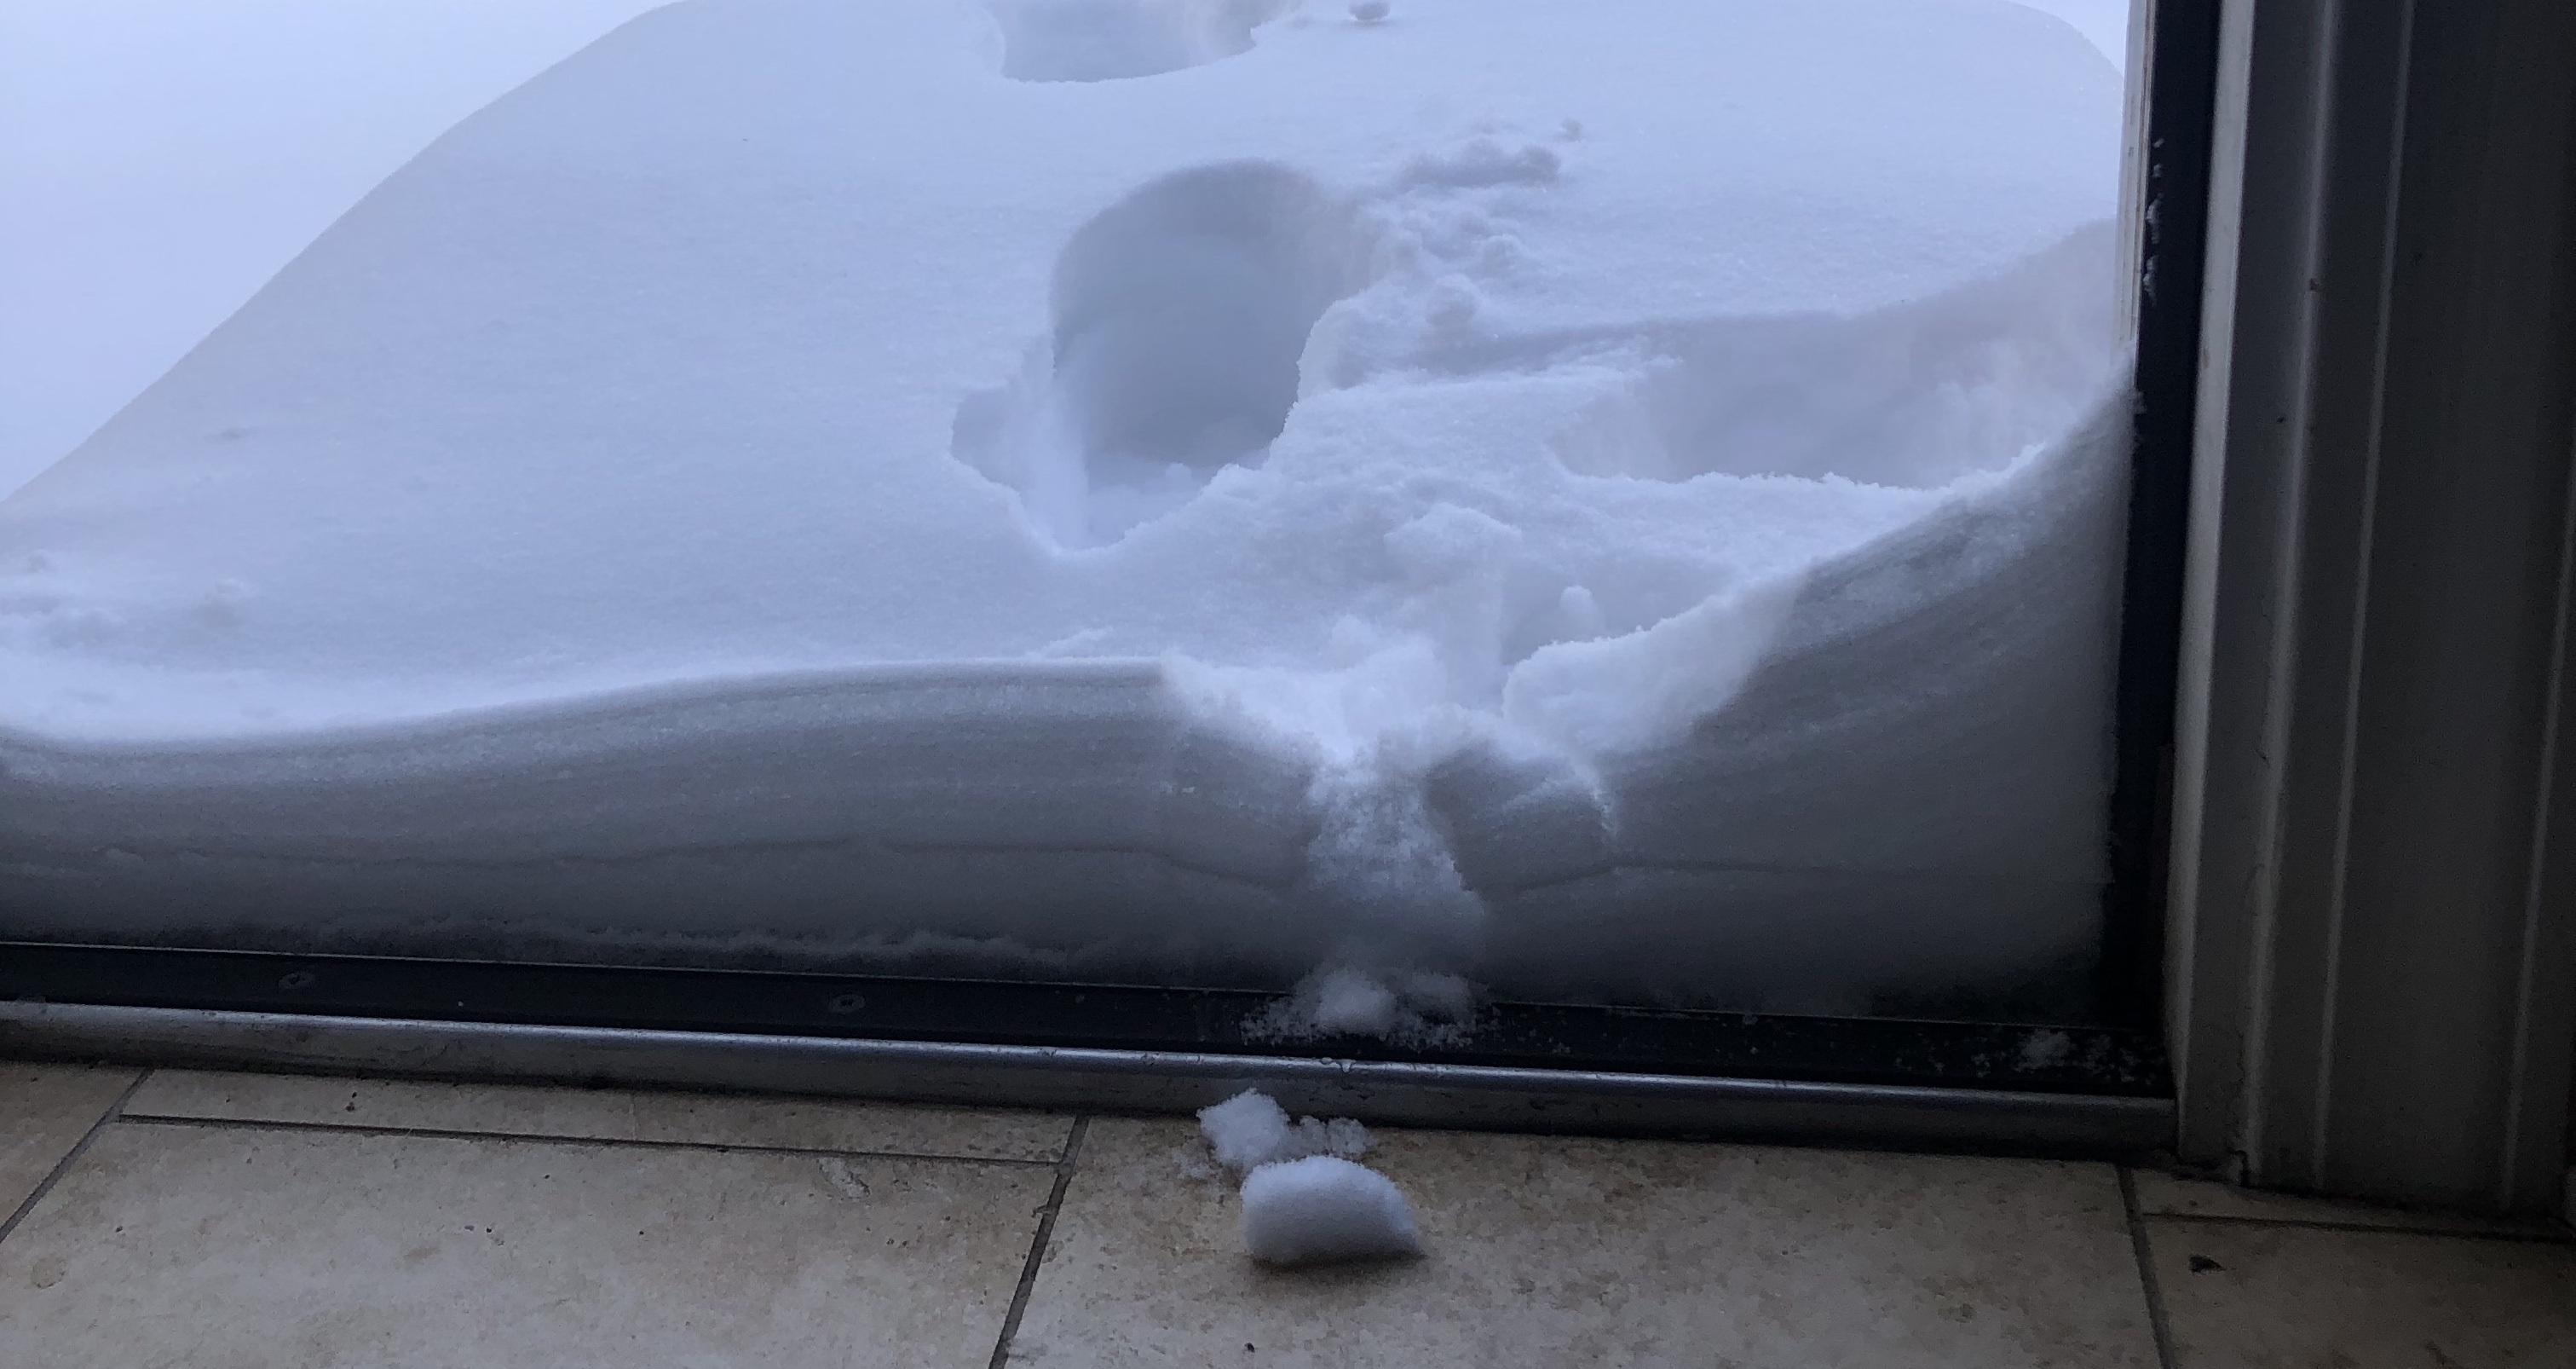 Layers of snow in a doorway